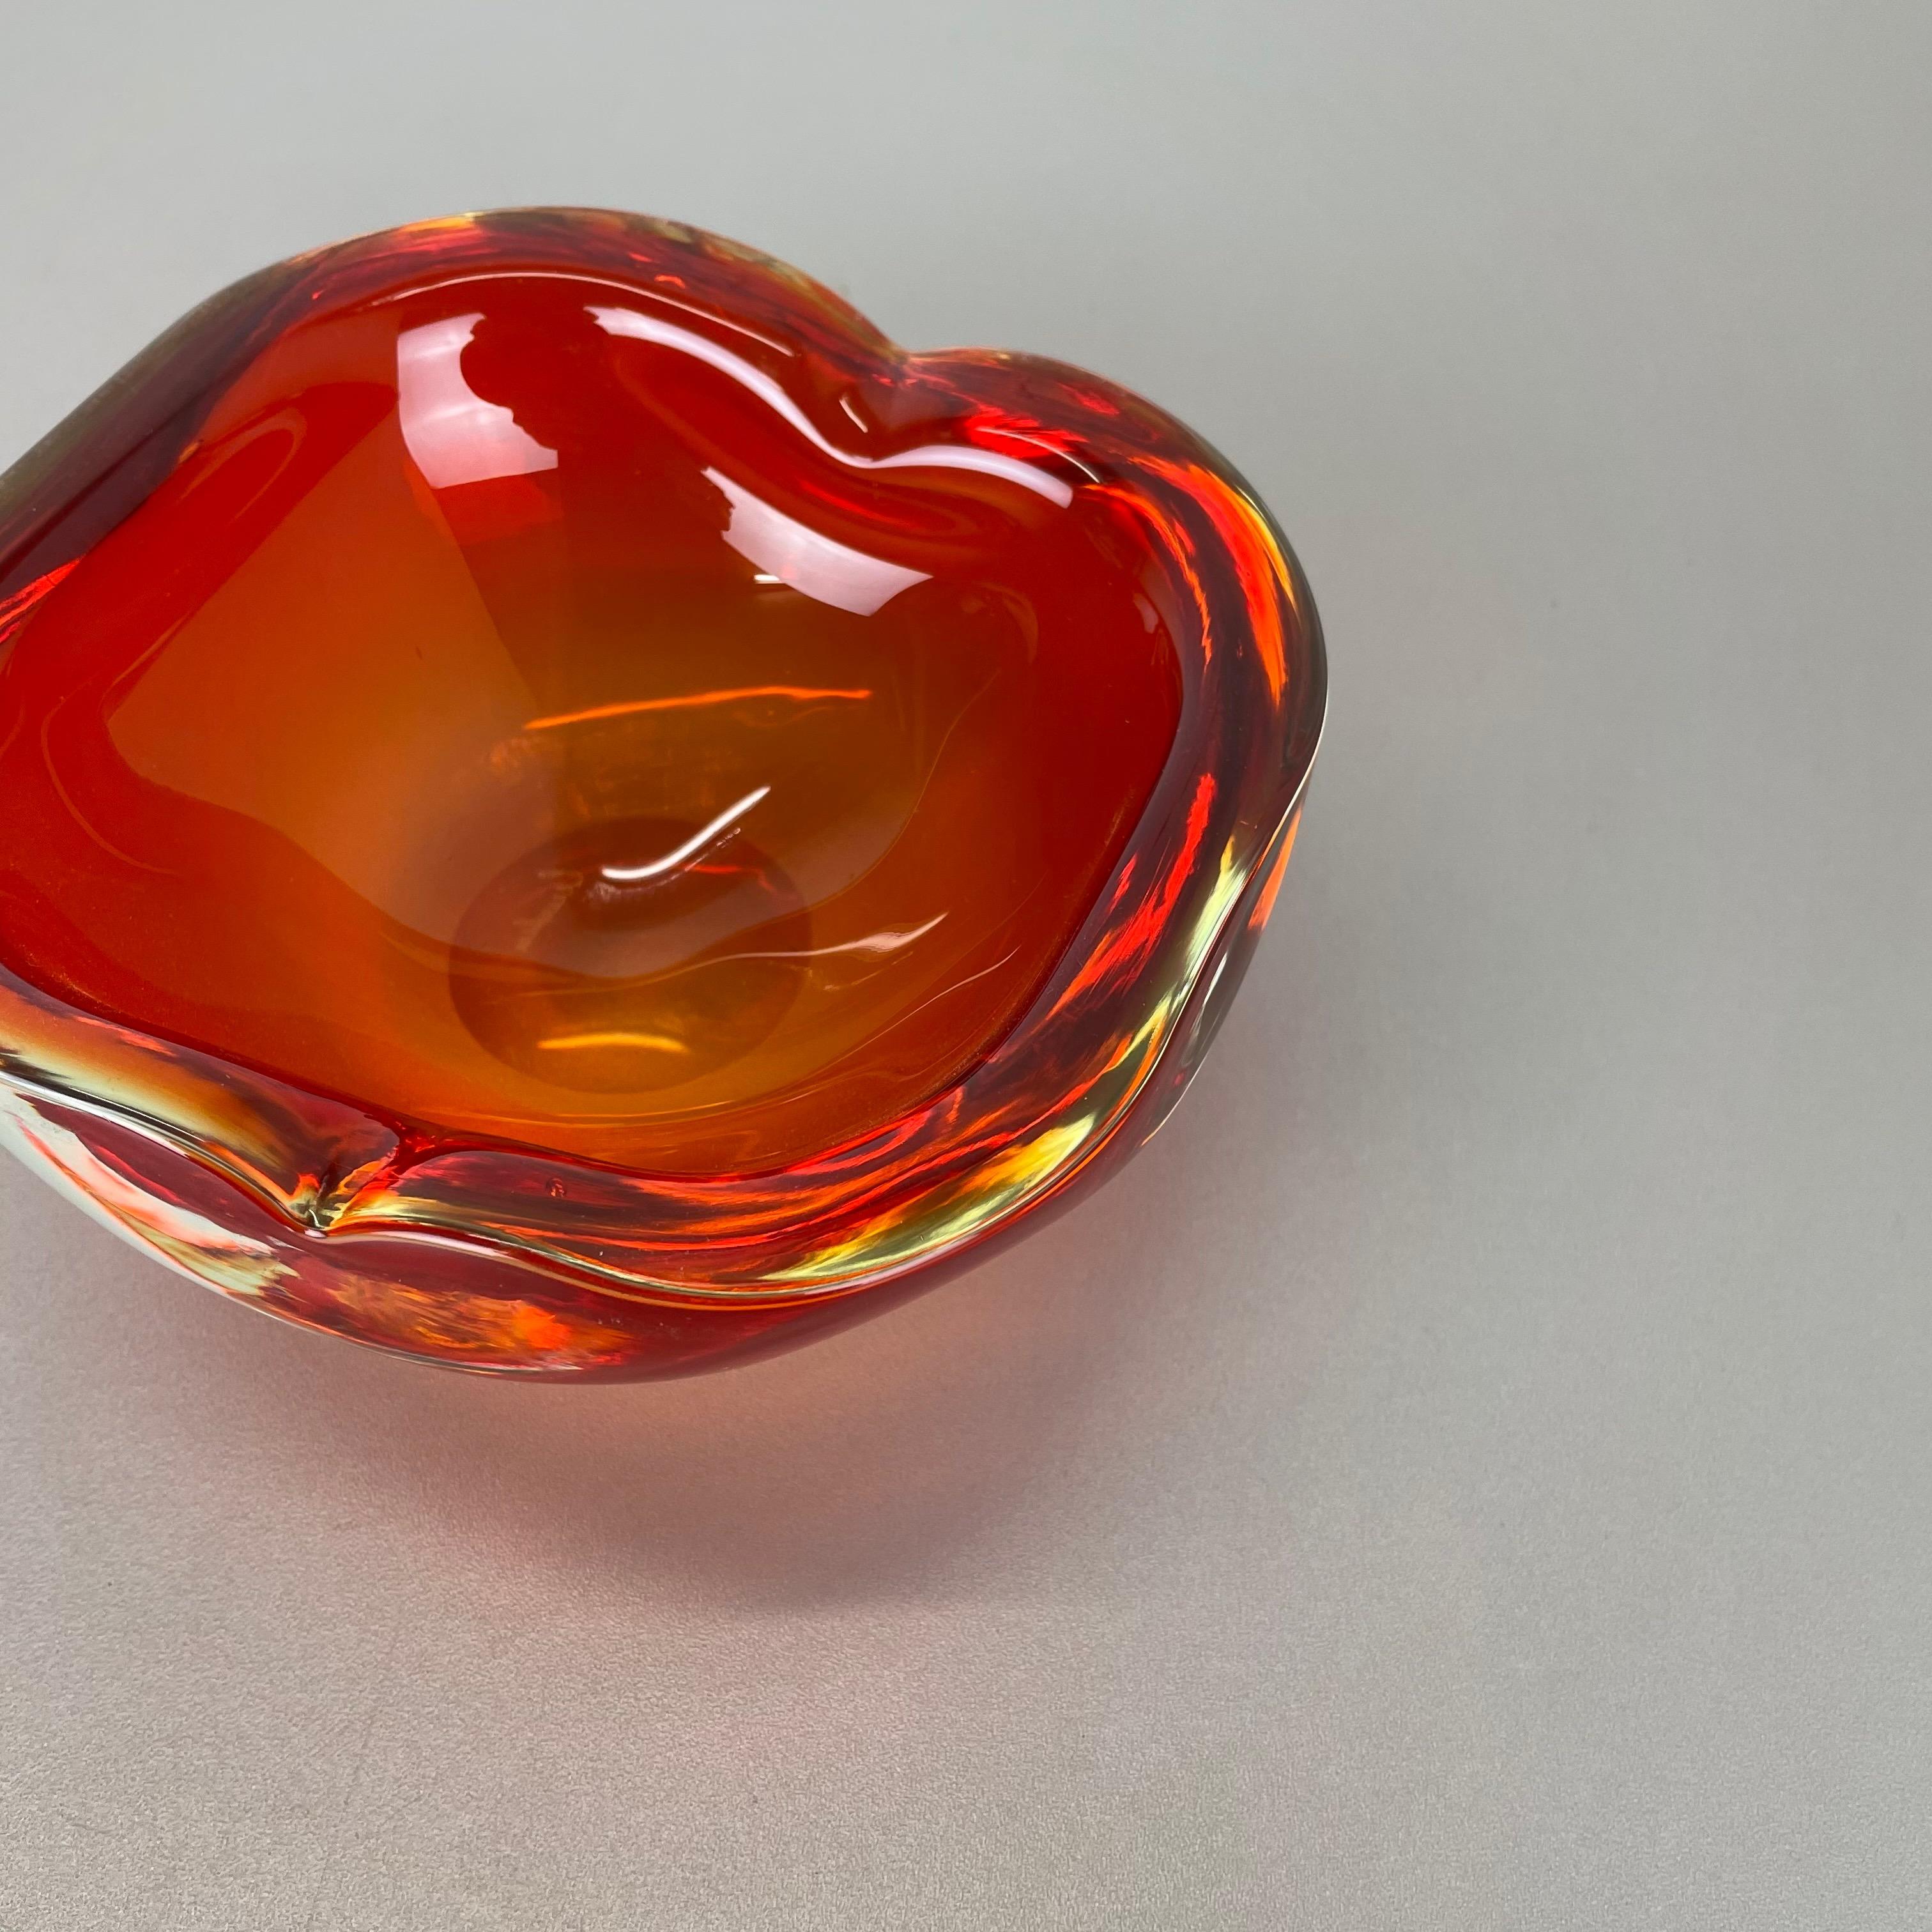 New Old Stock 1.3kg Red Murano Sommerso Glass Shell Bowl by Cenedese Vetri 1960s 1